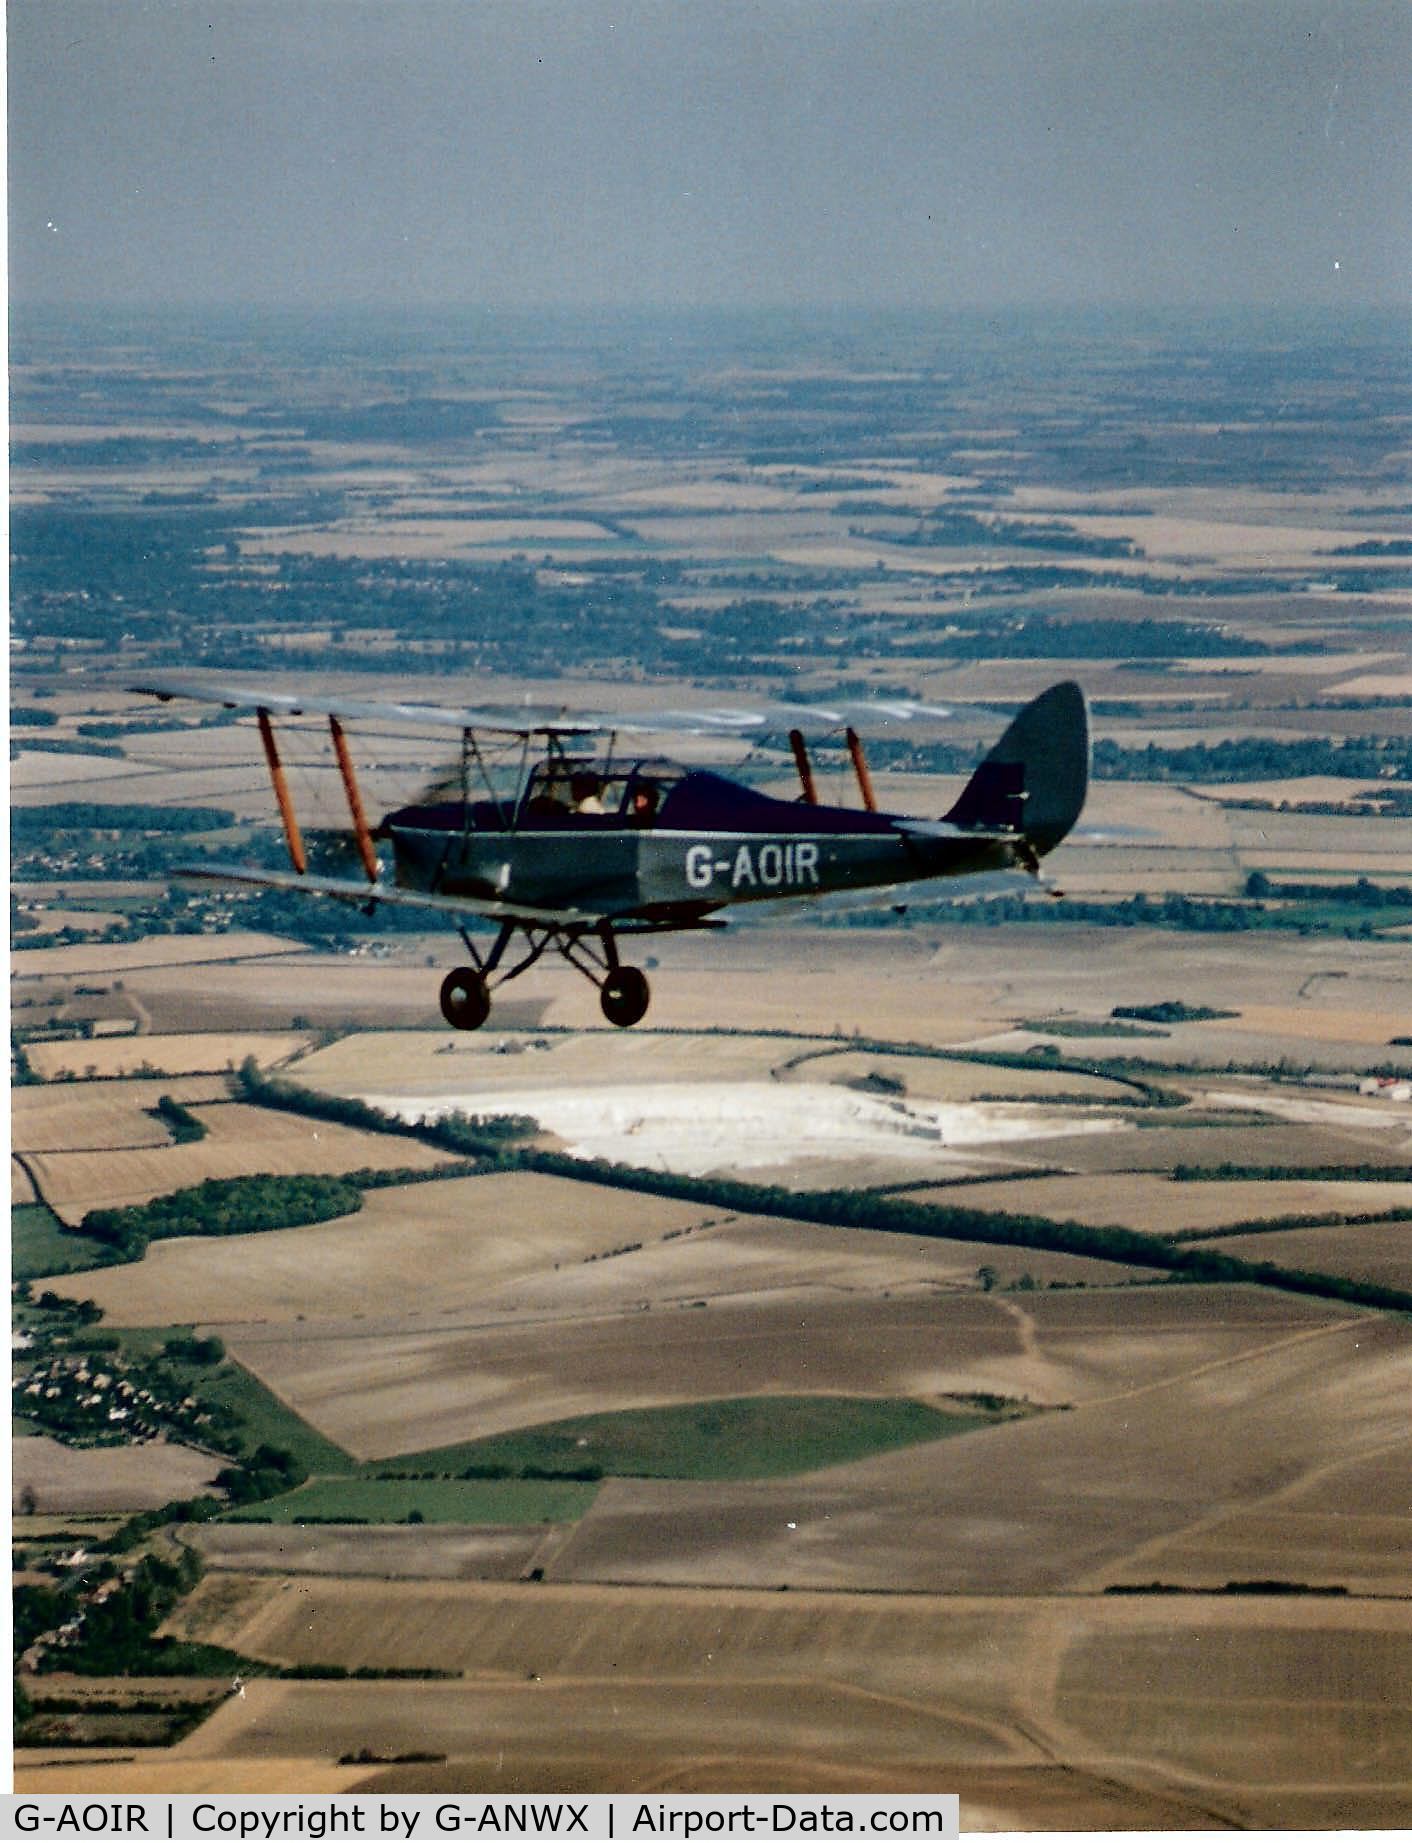 G-AOIR, 1943 Thruxton Jackaroo C/N 82882, Seen over Cambridgeshire countryside C1992 whilst being flown by Les Smith.